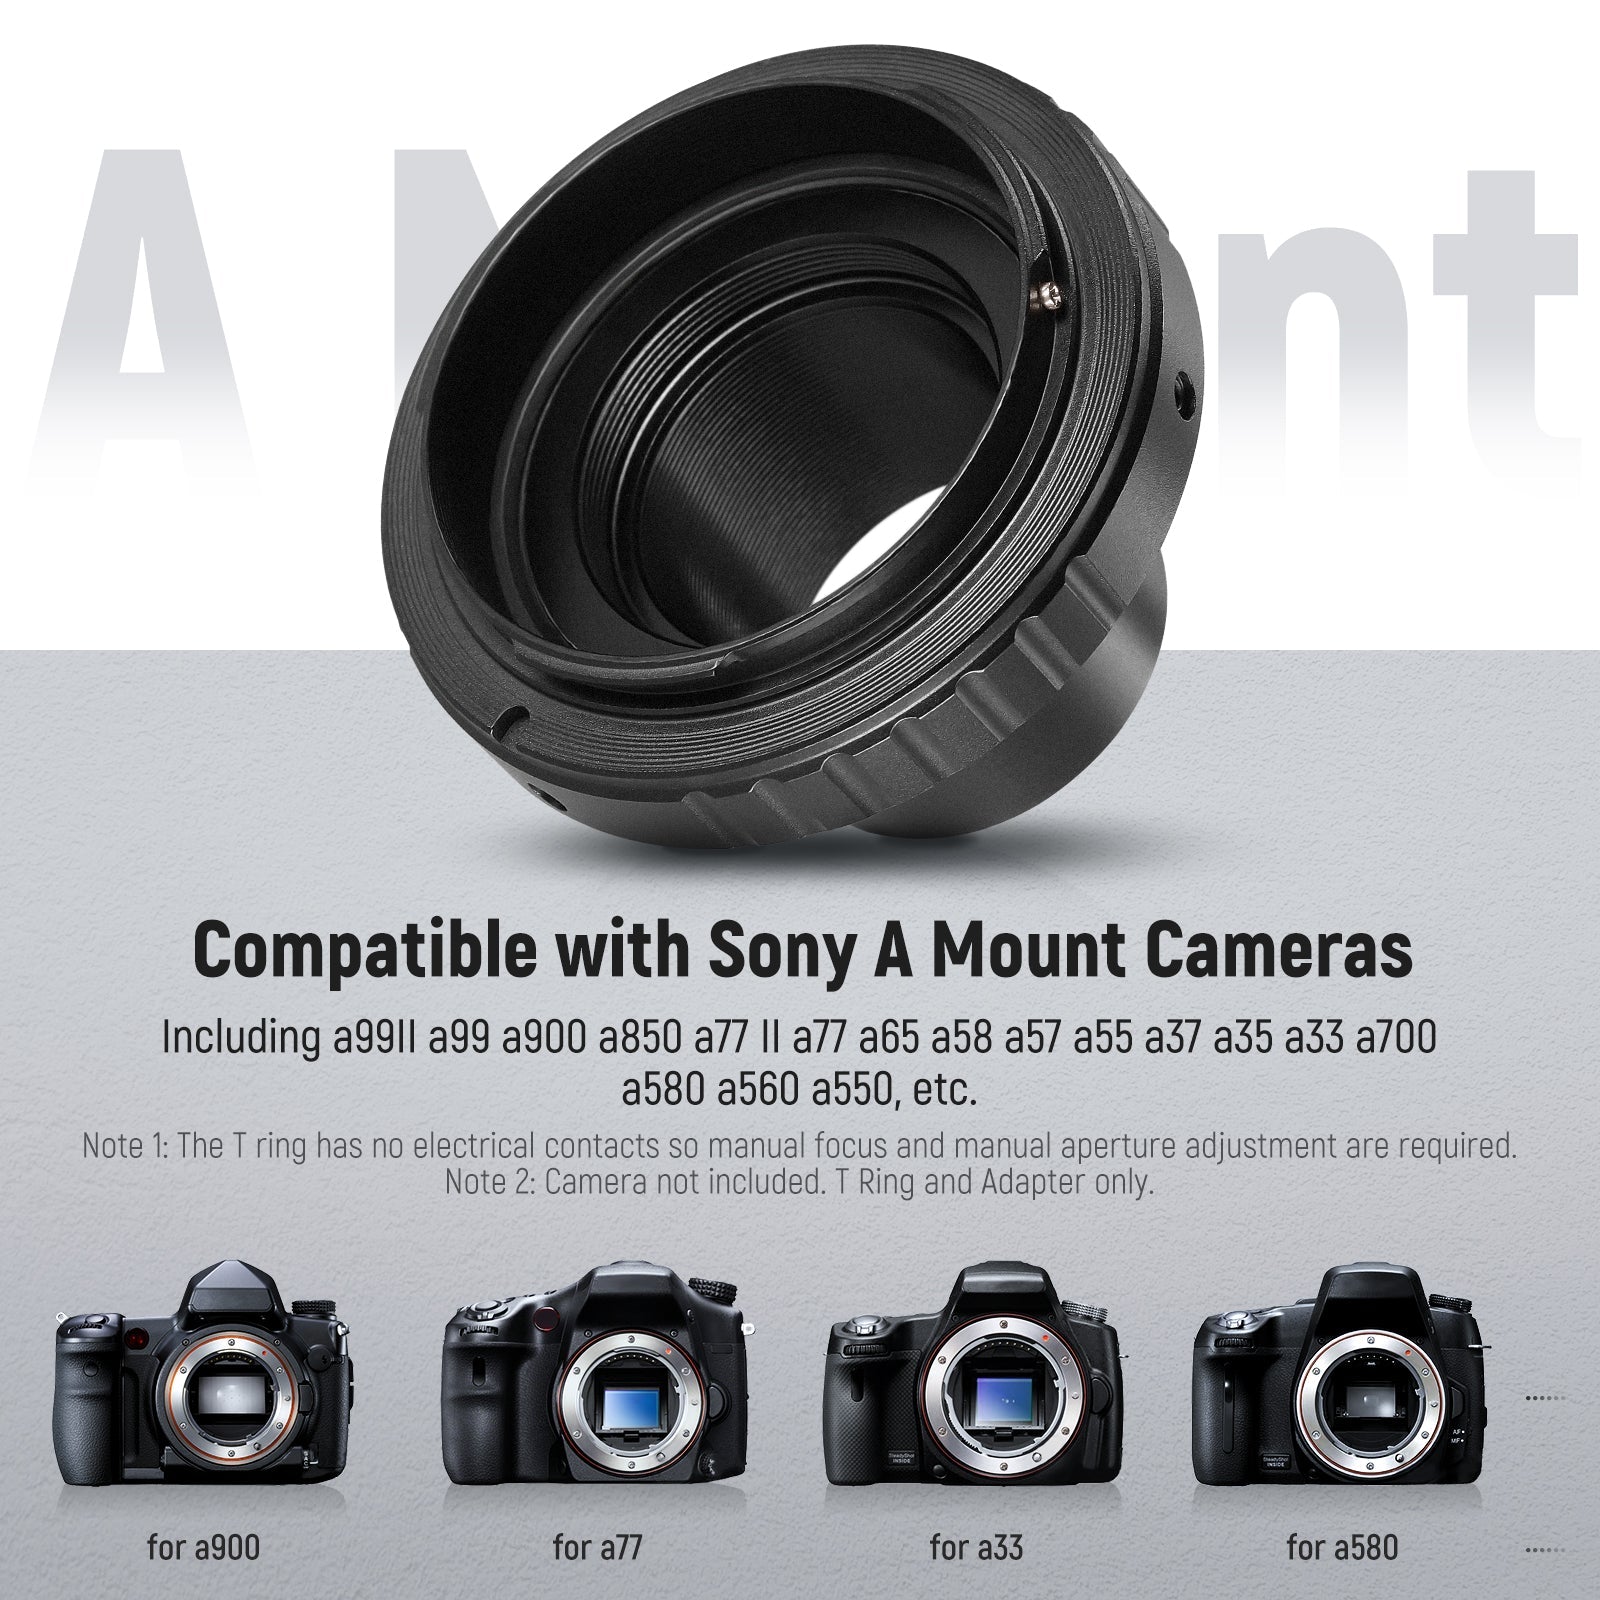 NEEWER LA-06 T Ring For Sony A Mount Cameras